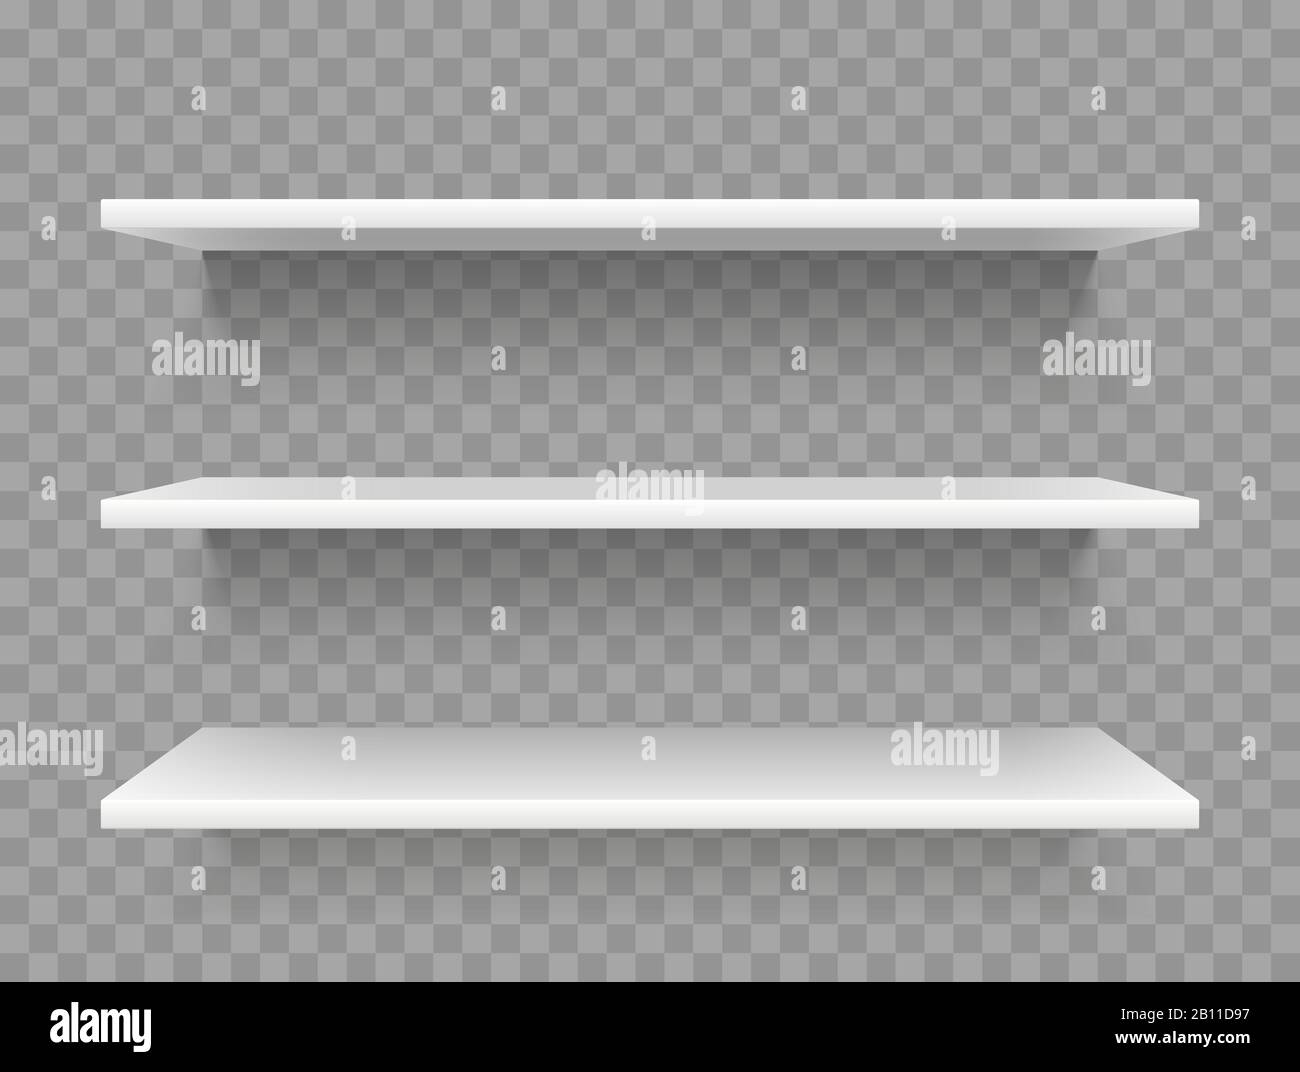 White empty product shelves. Supermarket display, promotional store shelf vector template Stock Vector